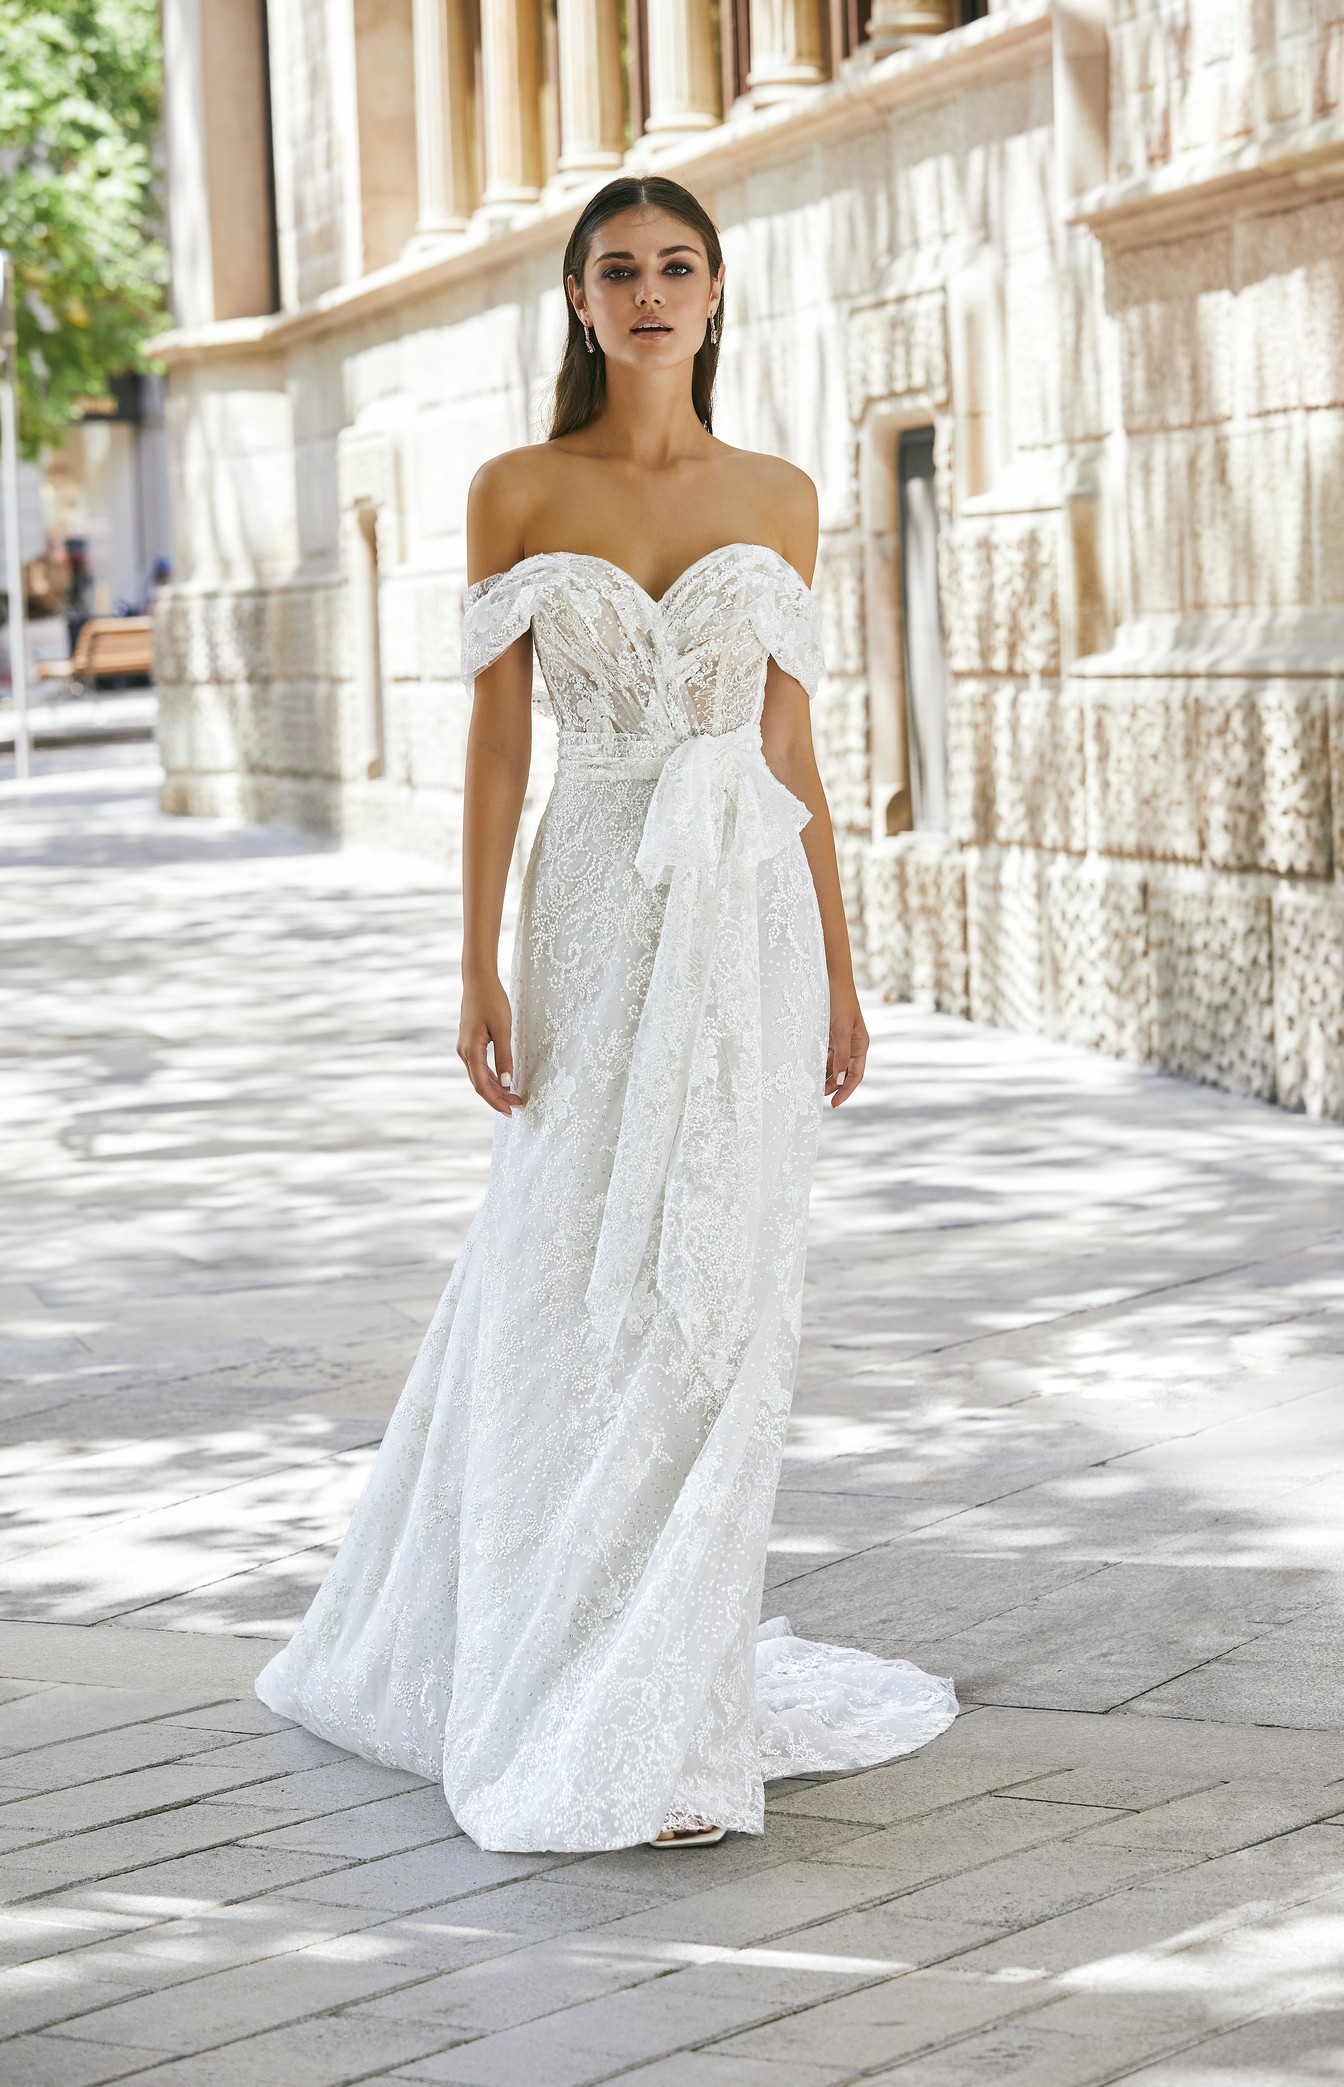 Brunette model stood outside a sunny stone building in Ronald Joyce 69724, a floaty lace  off-the-shoulder wedding dress style with draped cap sleeves, an illusion bodice and striking bow waist detail